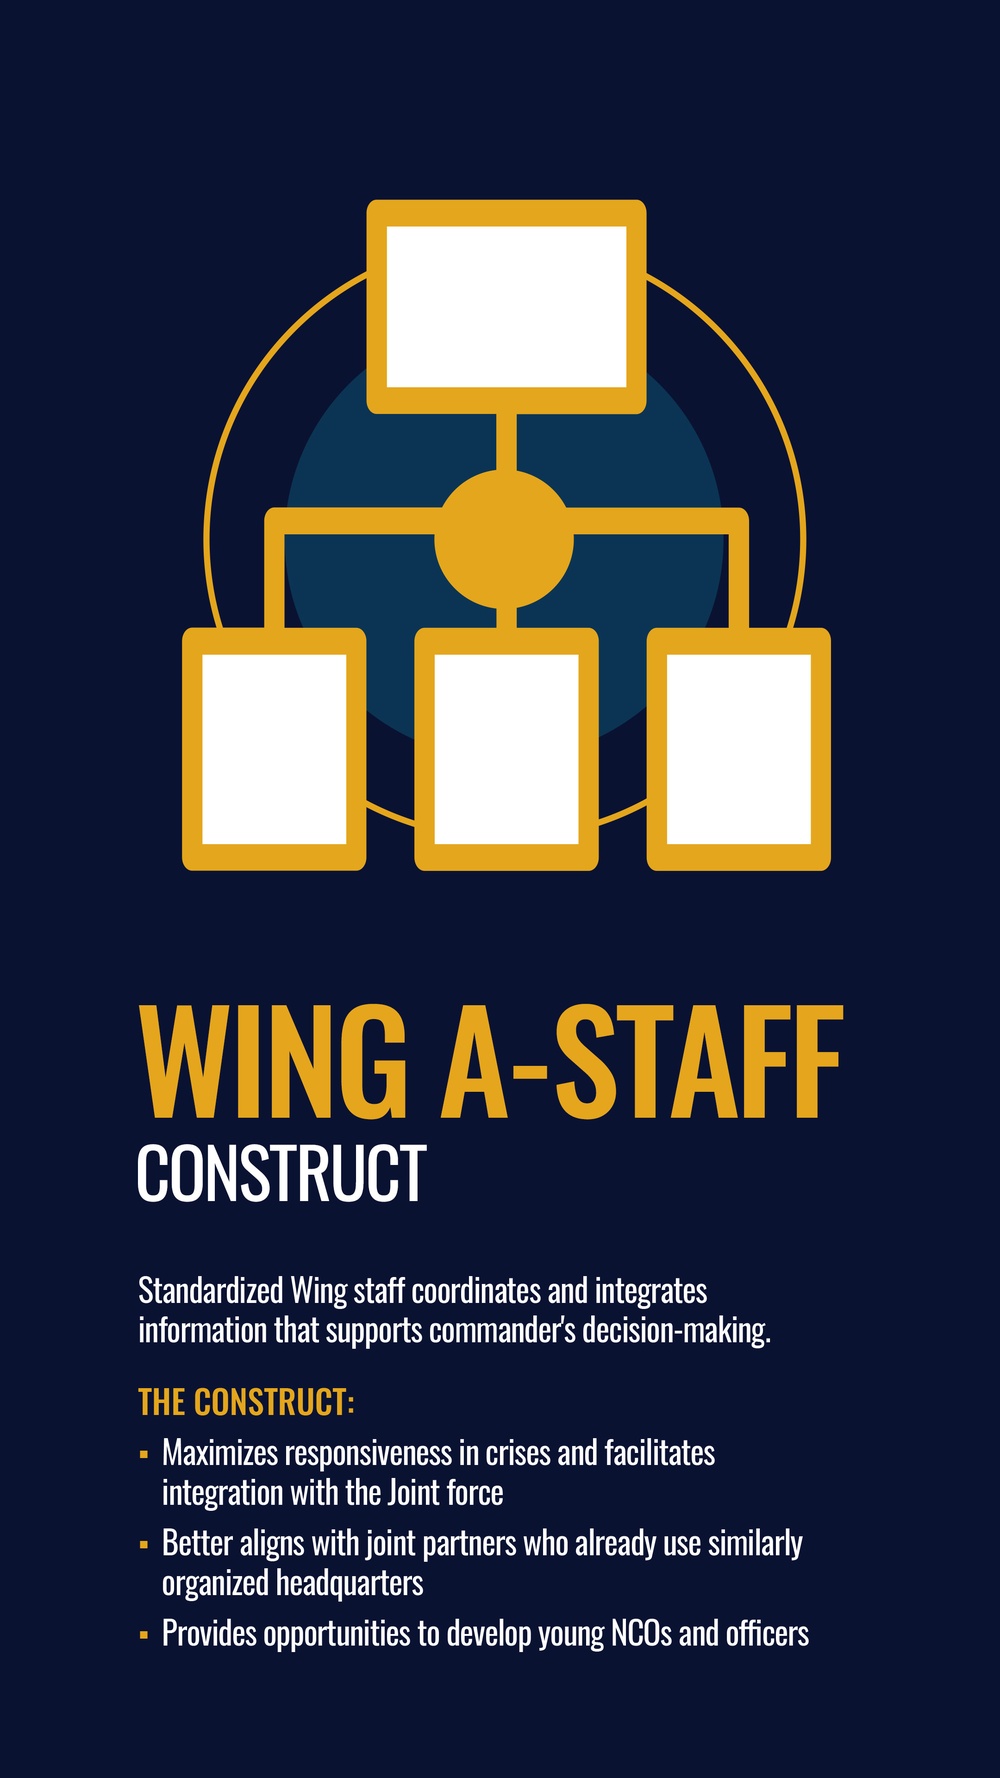 Drivers For Change: Wing A-Staff